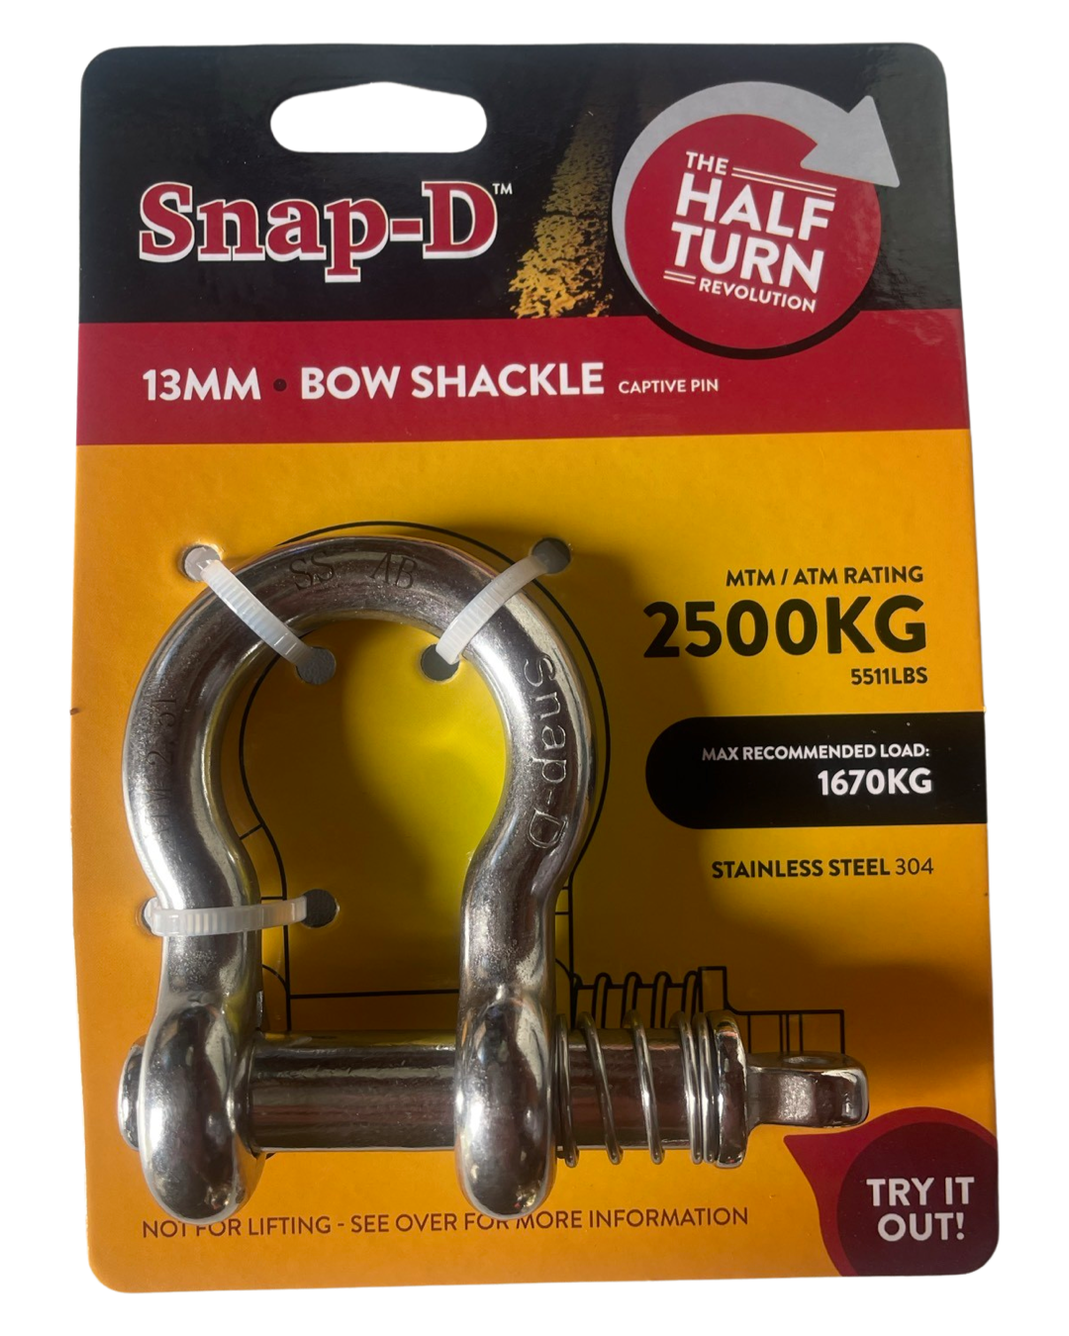 Multi Bow Shackle Pack (6x Bow Shackles)